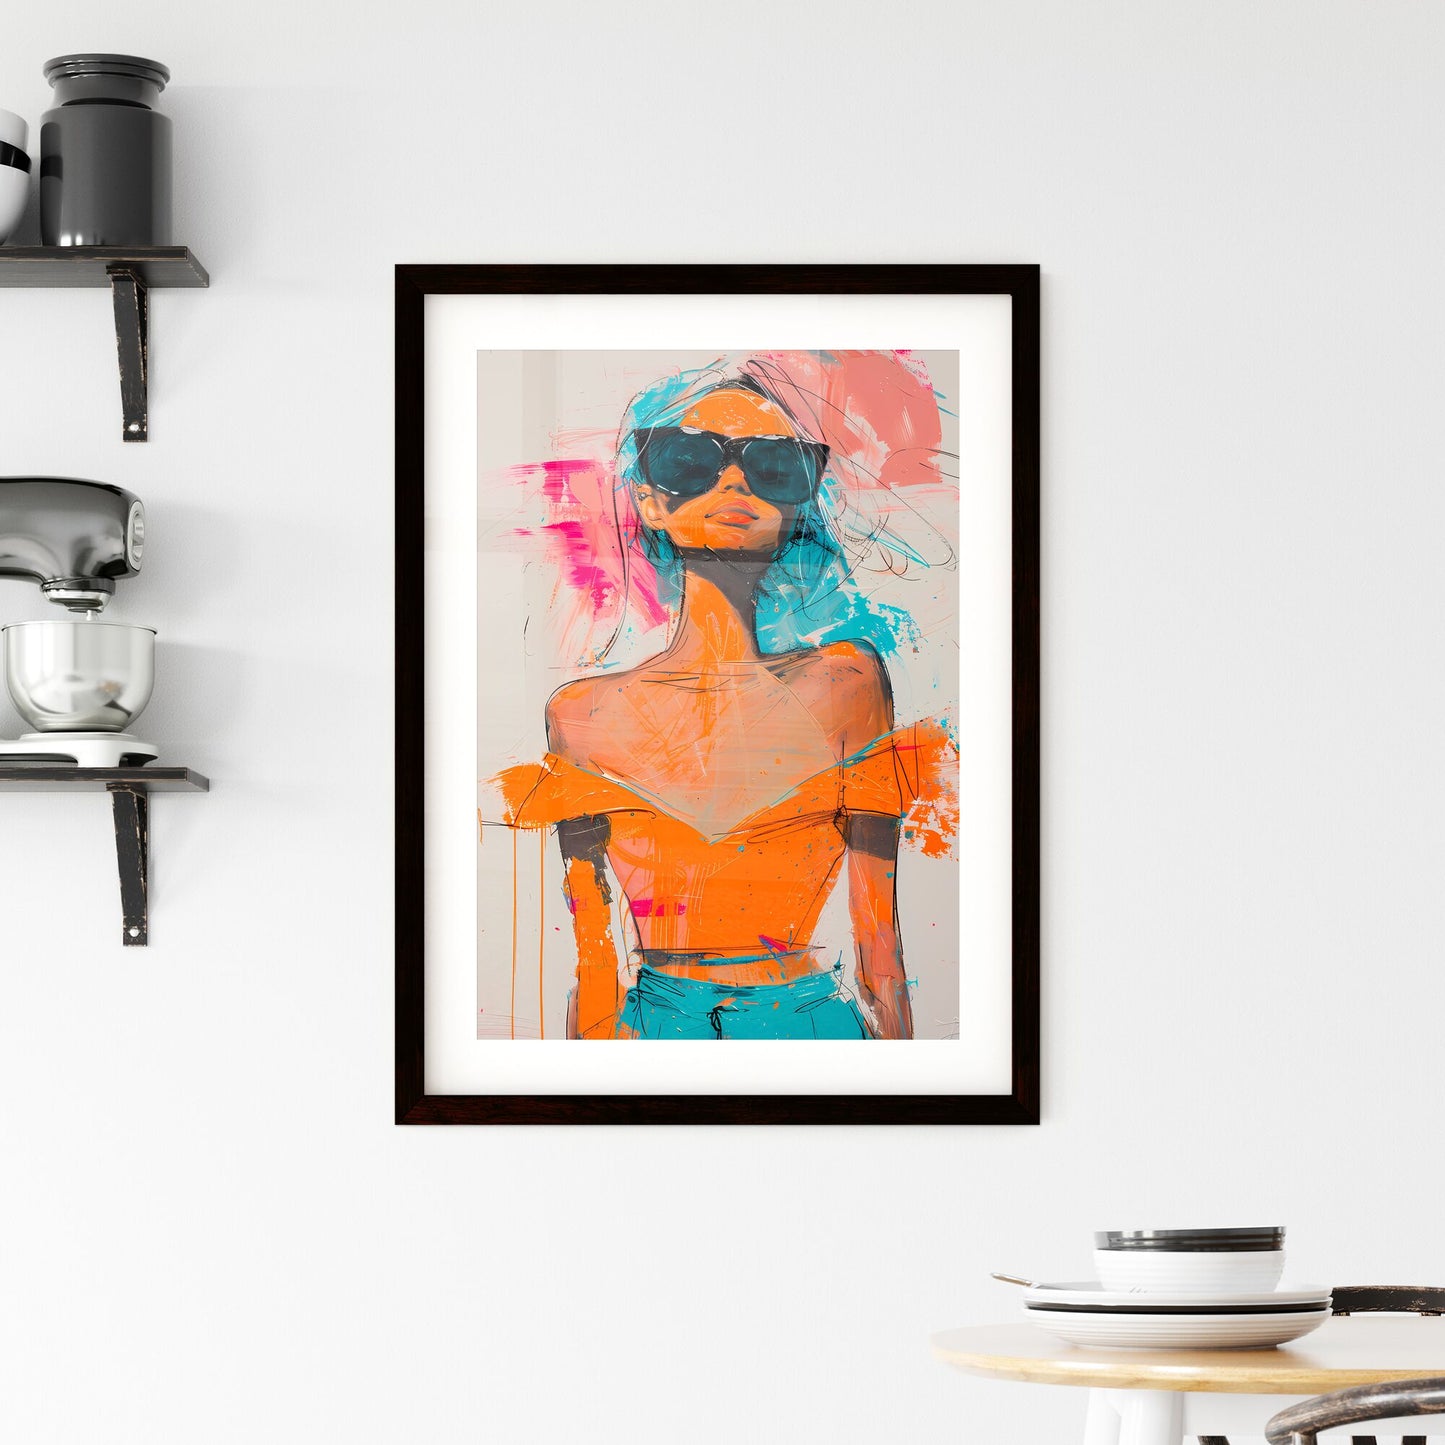 Blake style, colorful masterpiece: Full length image of a stylish woman wearing sunglasses and a mini dress, whimsical, joyous, surreal expressionist art, emerging artist, contemporary, modern Default Title